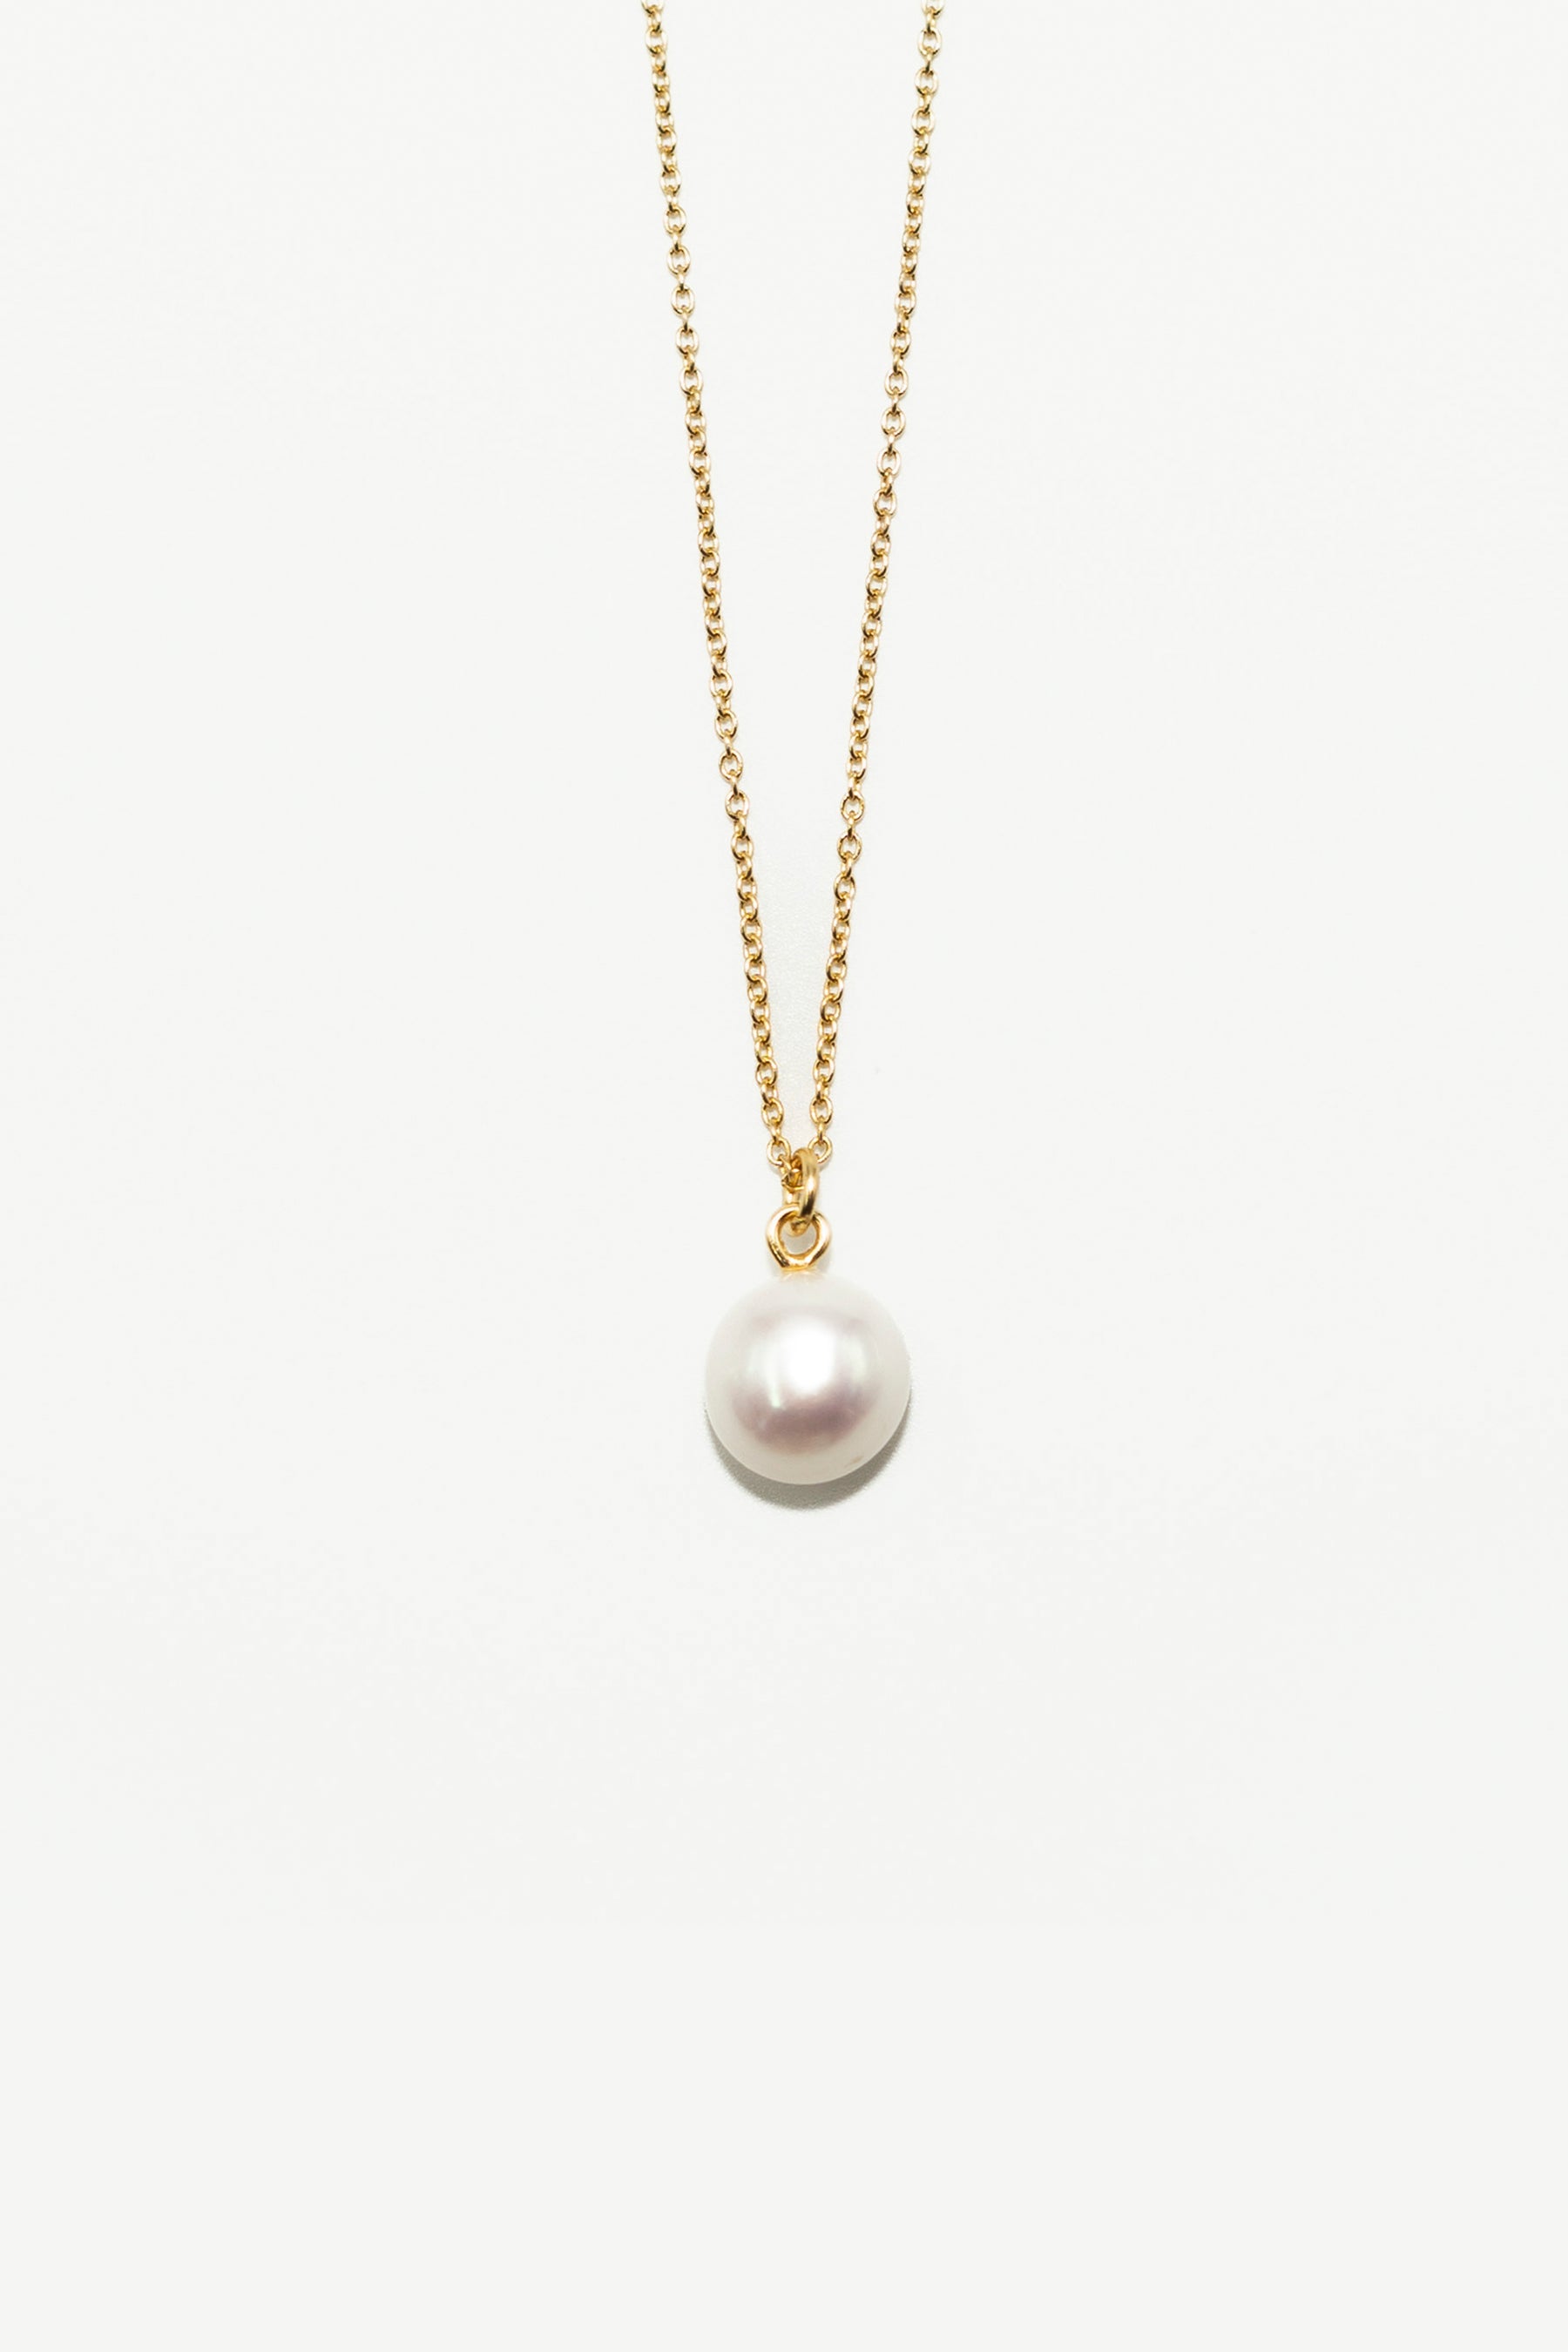 Sorelle ApS Pearly necklace Necklace